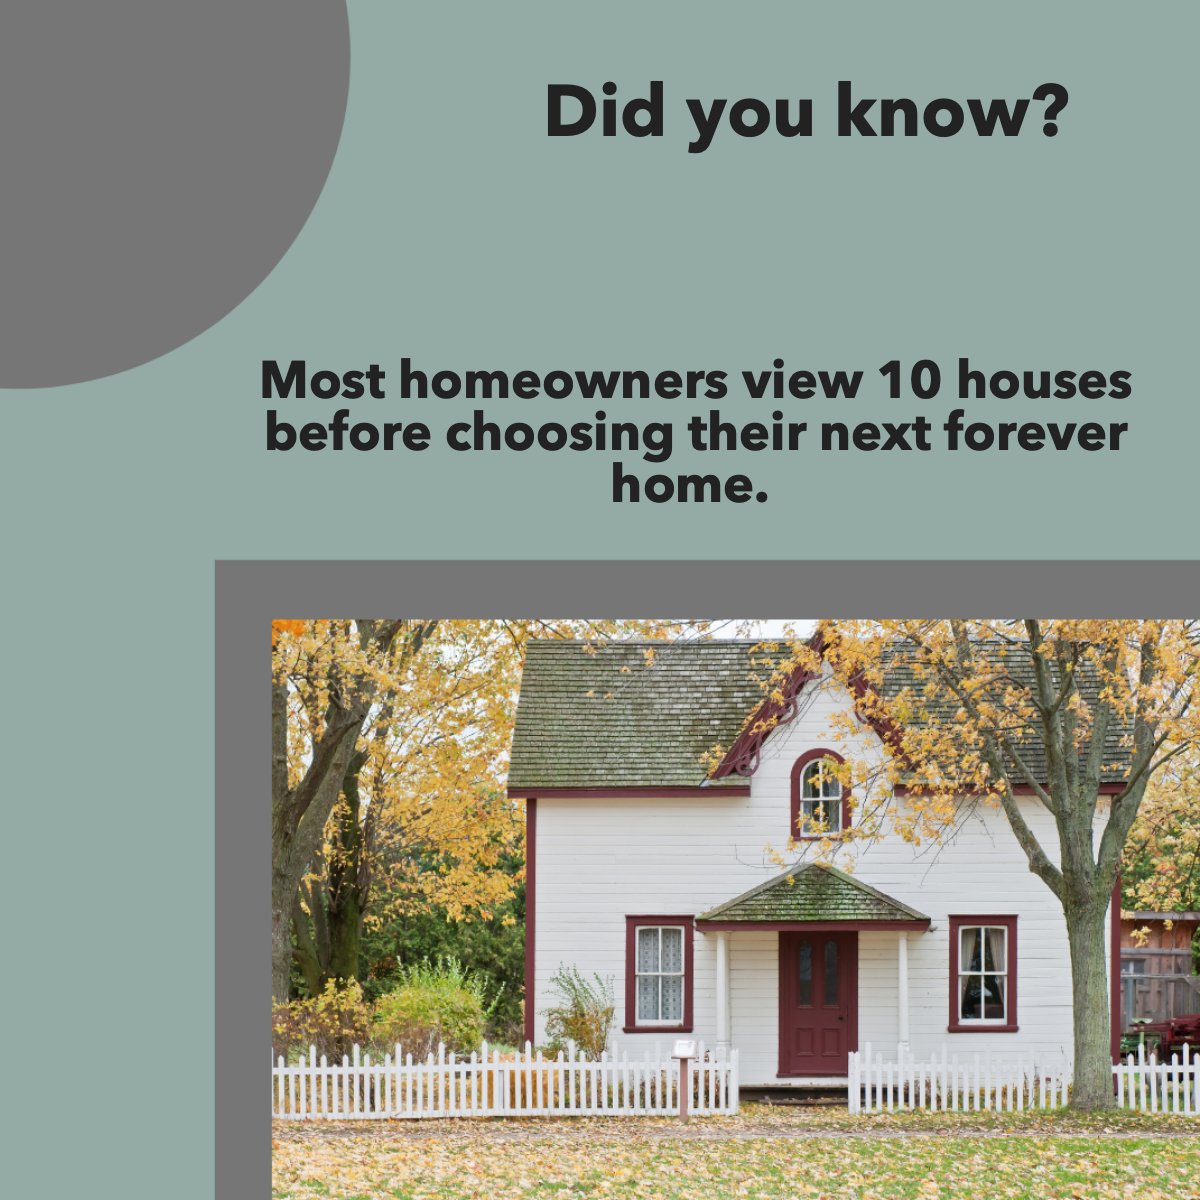 Did you know how many houses a homeowner view before choosing their home? 👀 Share your answer in the comments below! #happyhomeowners #newhomeowners #homeownershipgoals